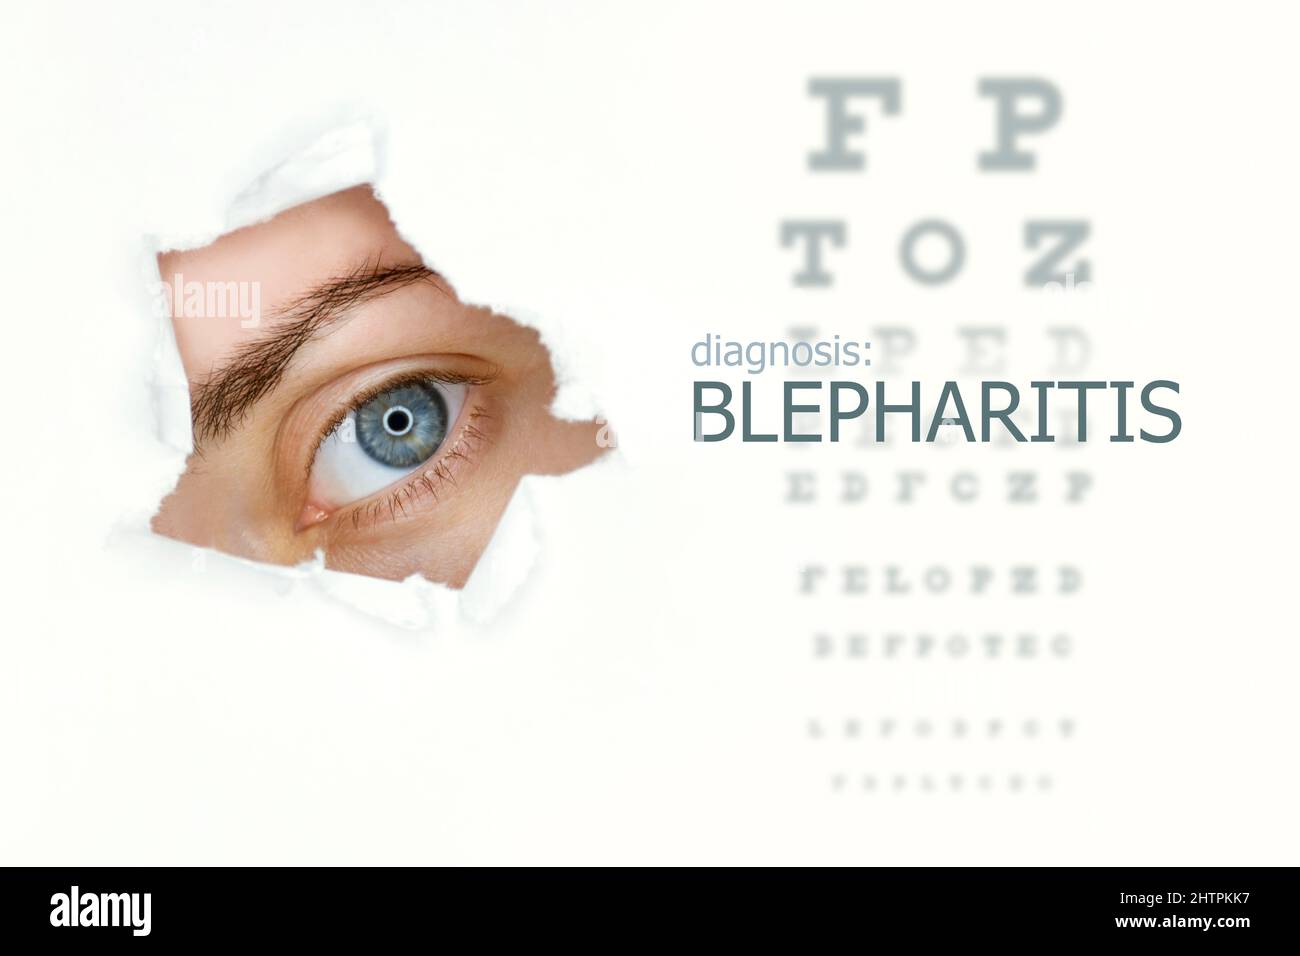 Blepharitis disease poster with eye test and blue eye on left. Isolated on white Stock Photo